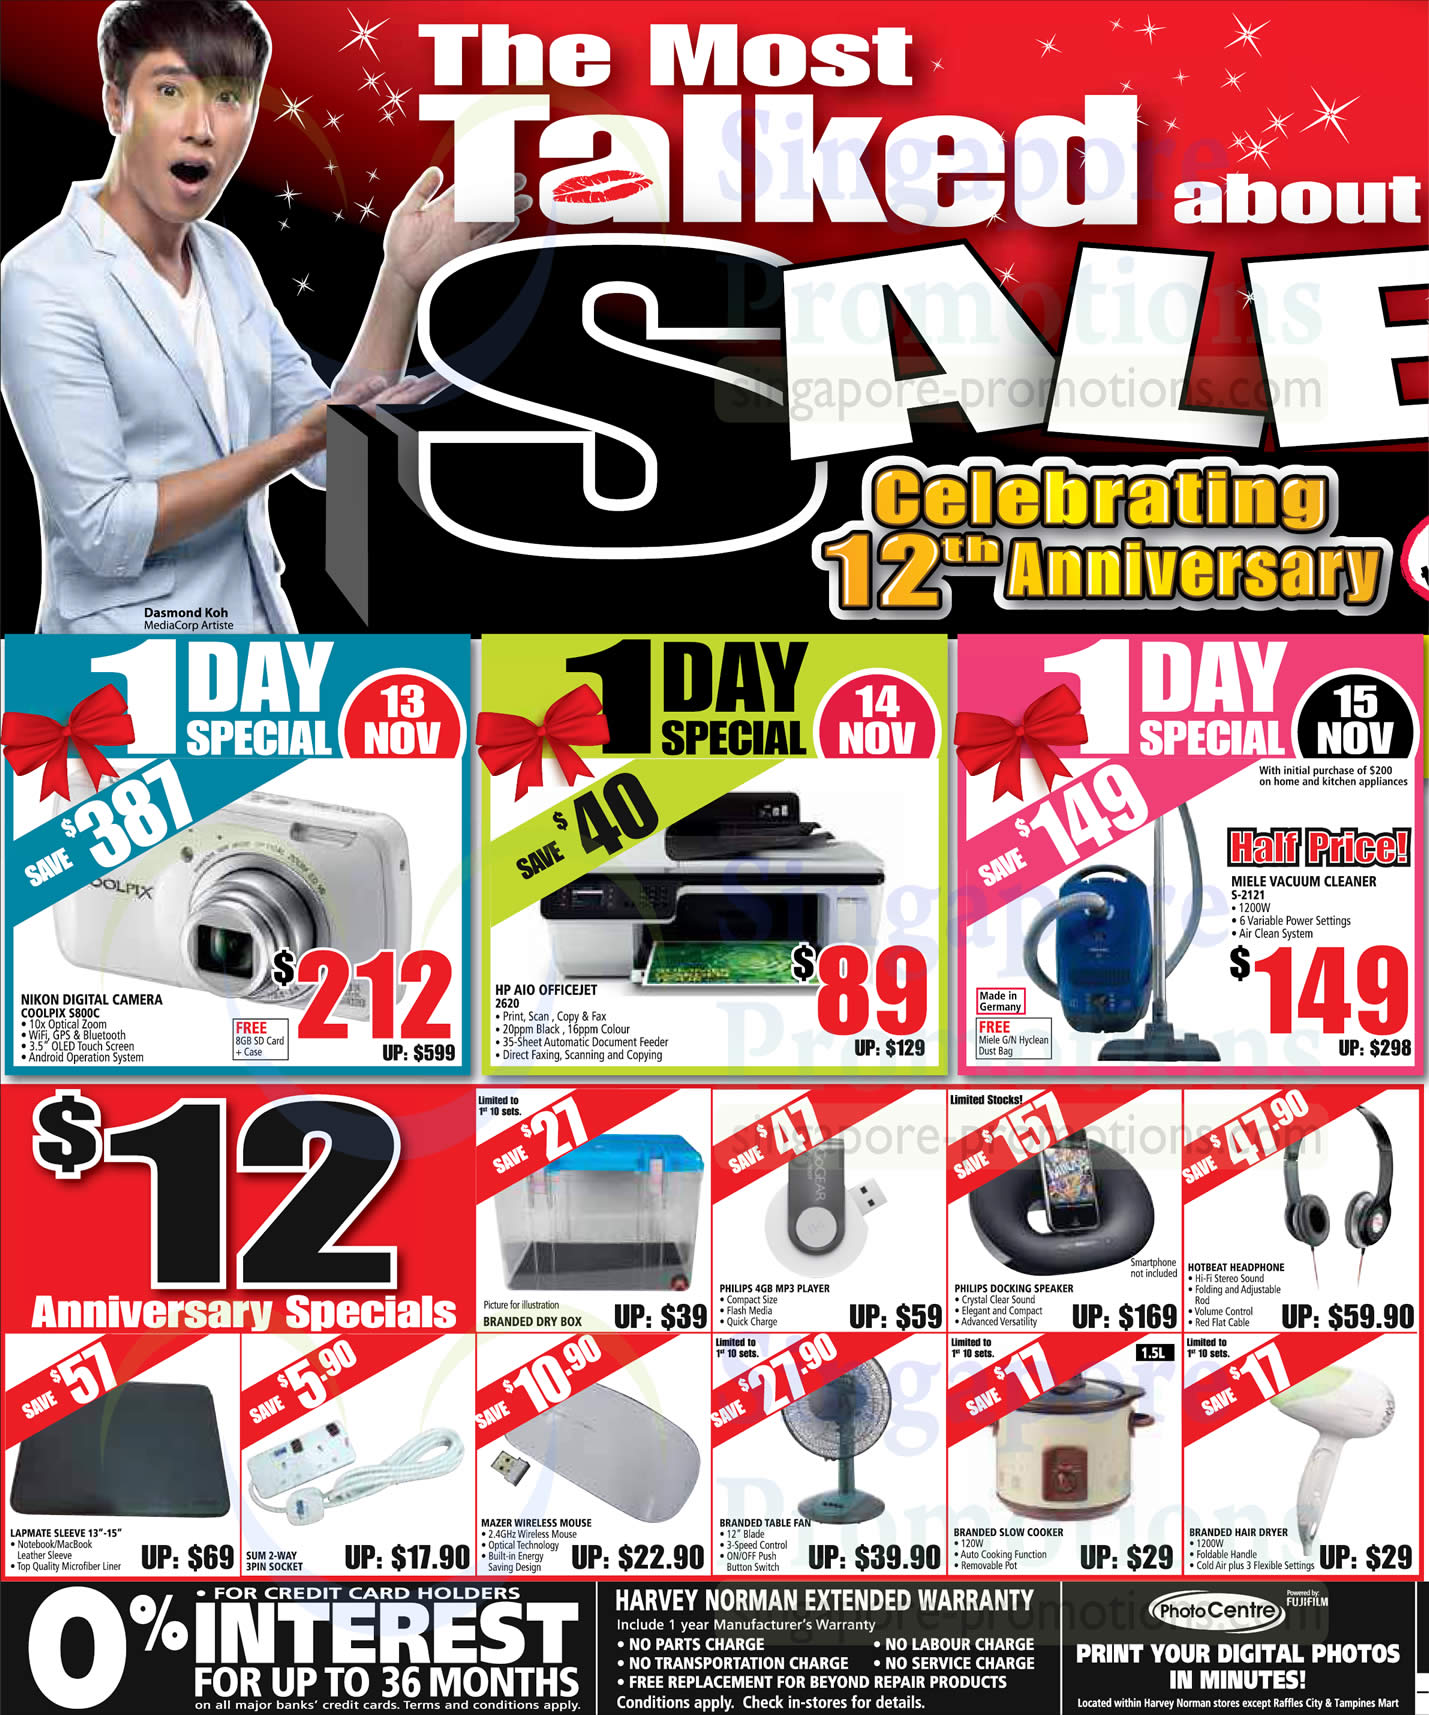 Featured image for Harvey Norman Digital Cameras, Furniture, Notebooks & Appliances Offers 13 - 17 Nov 2013